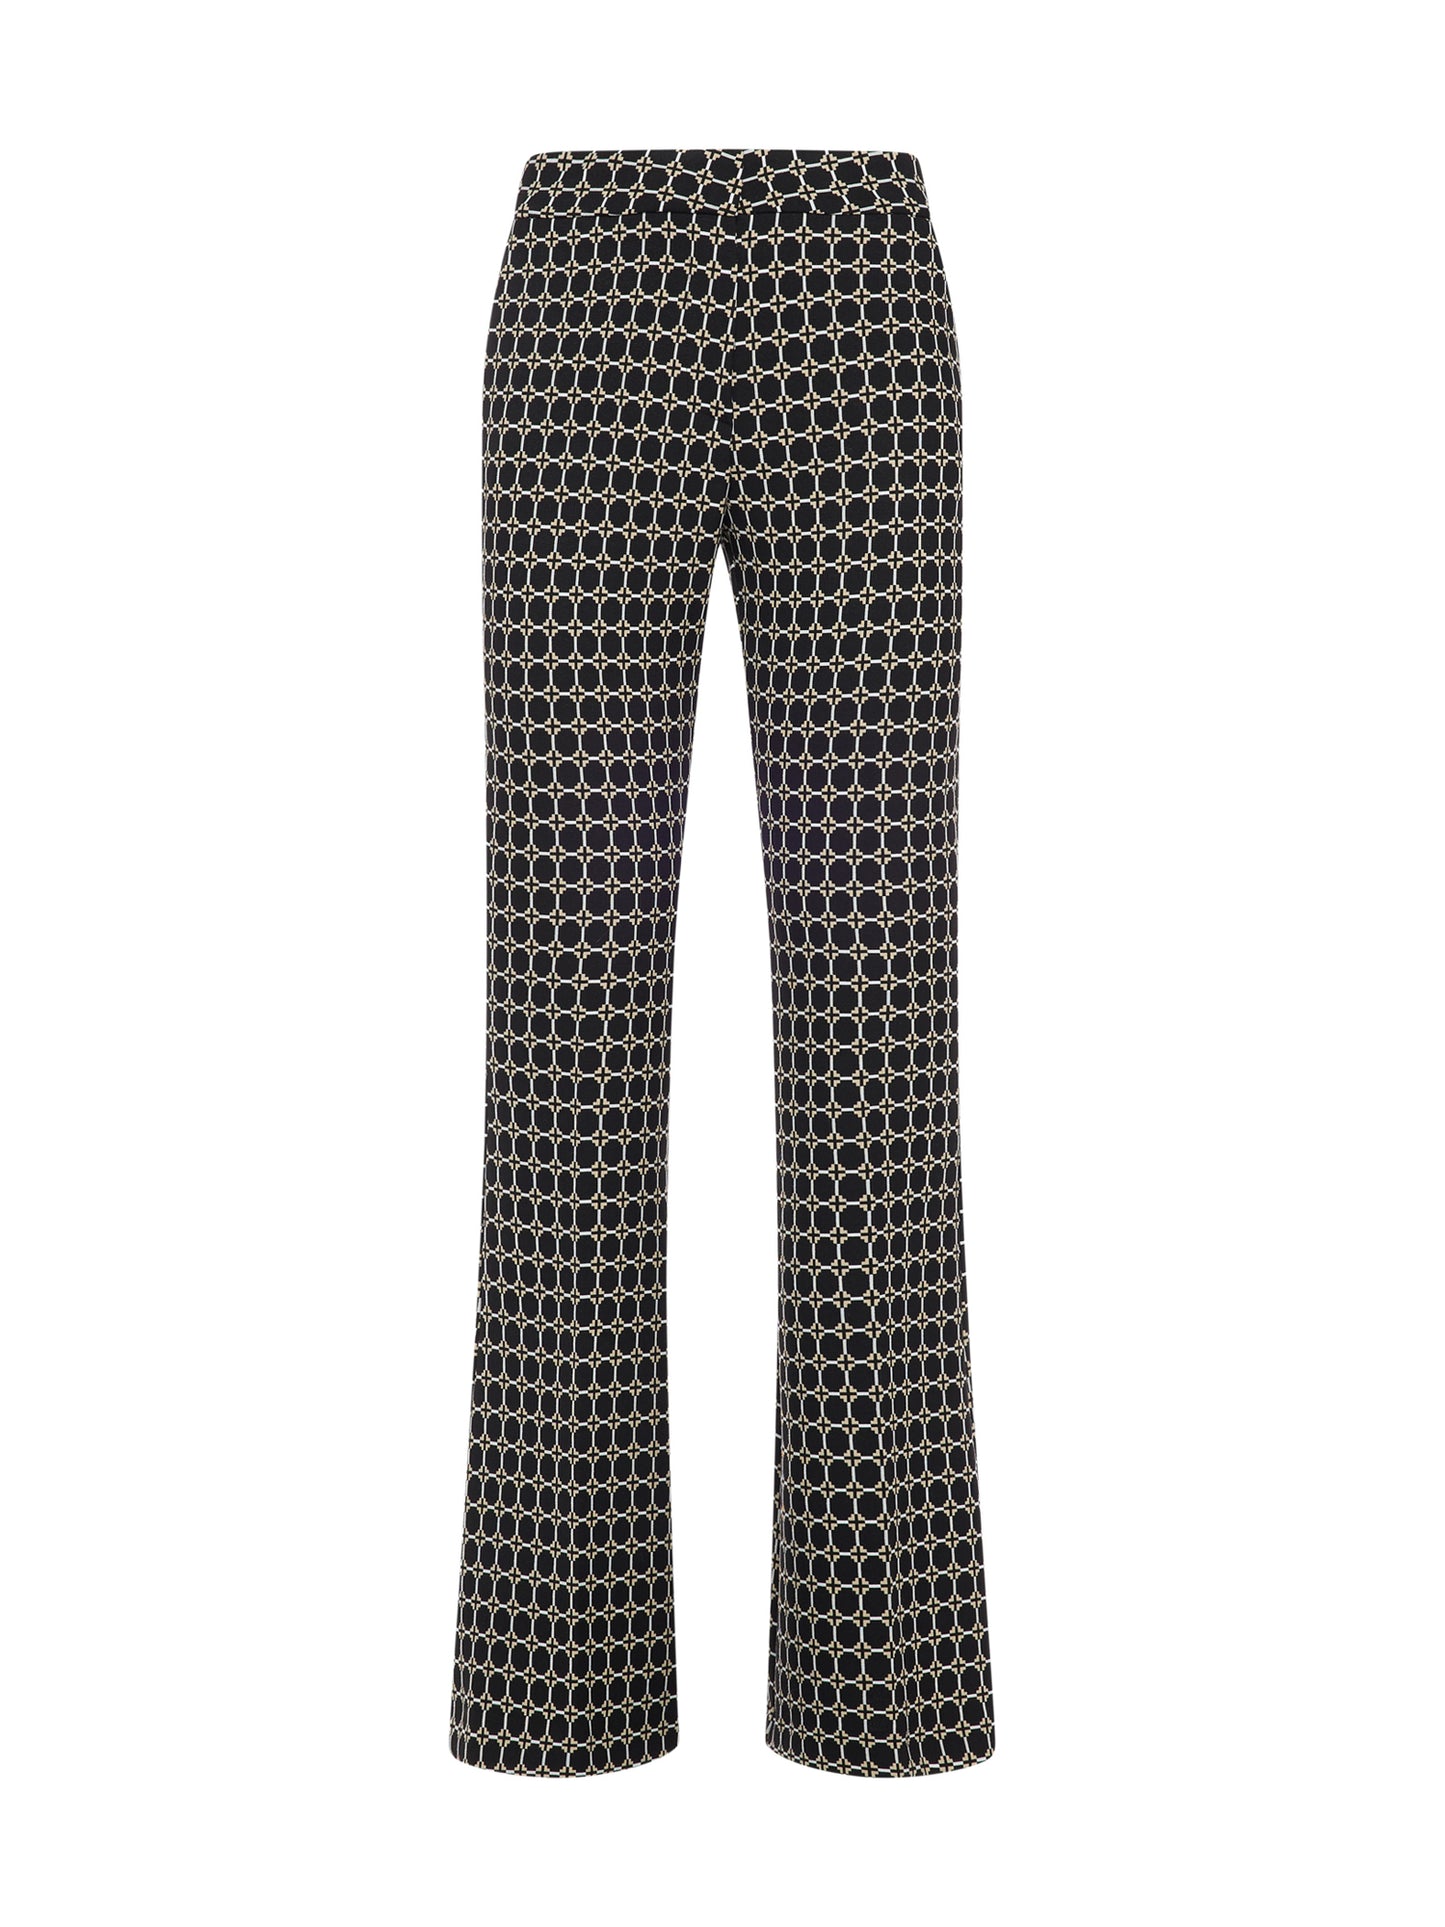 Flare trousers in jacquard with geometric line print